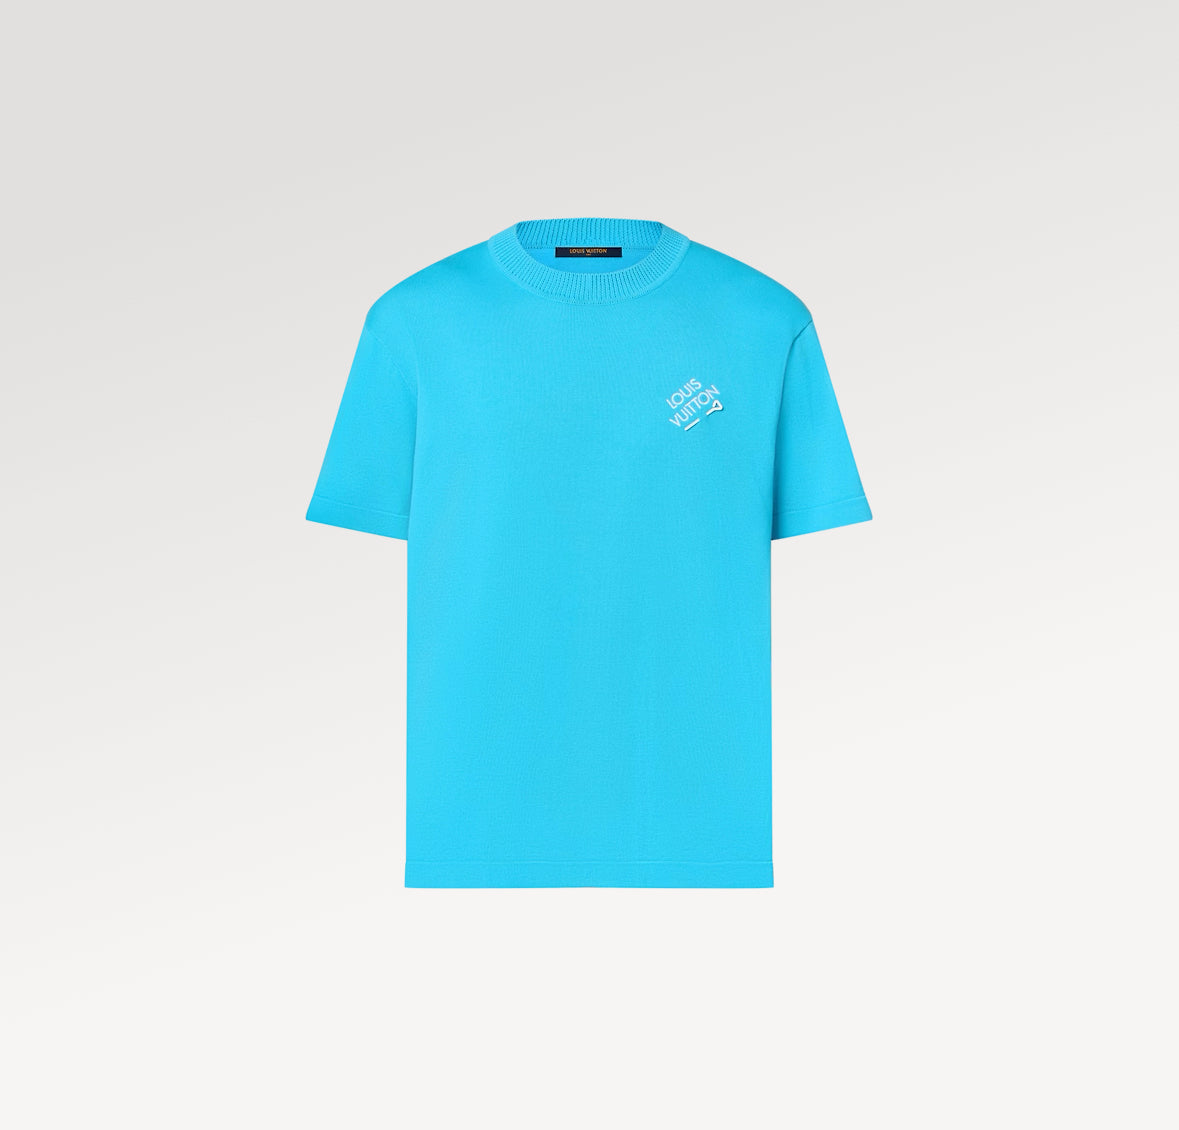 Tyler, The Creator x Louis Vuitton Embroidered Signature Short-Sleeved Cotton T-Shirt “Blue”